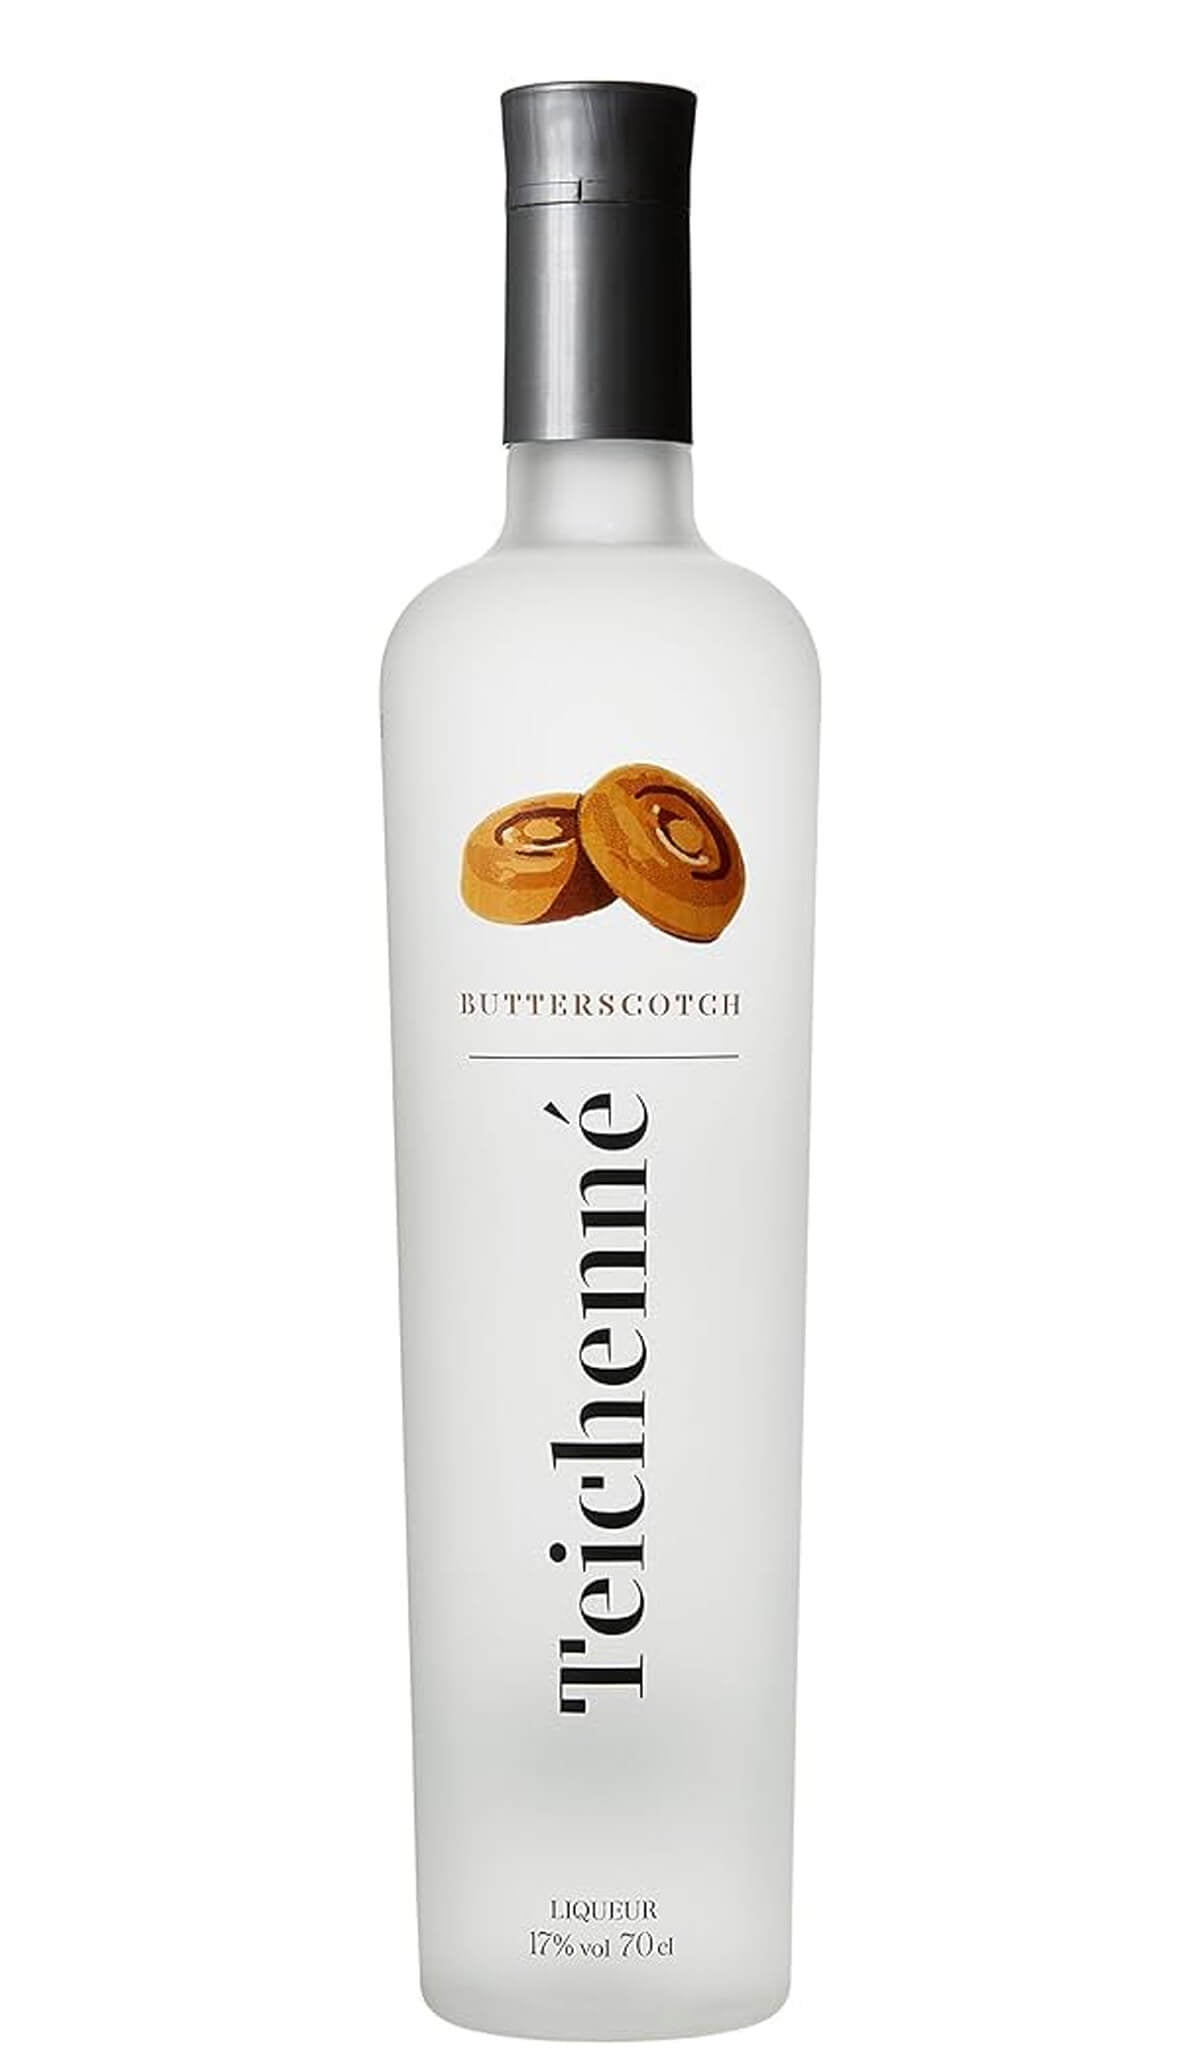 Find out more or buy Teichenné Butterscotch Schnapps Liqueur 700ml online at Wine Sellers Direct - Australia’s independent liquor specialists.